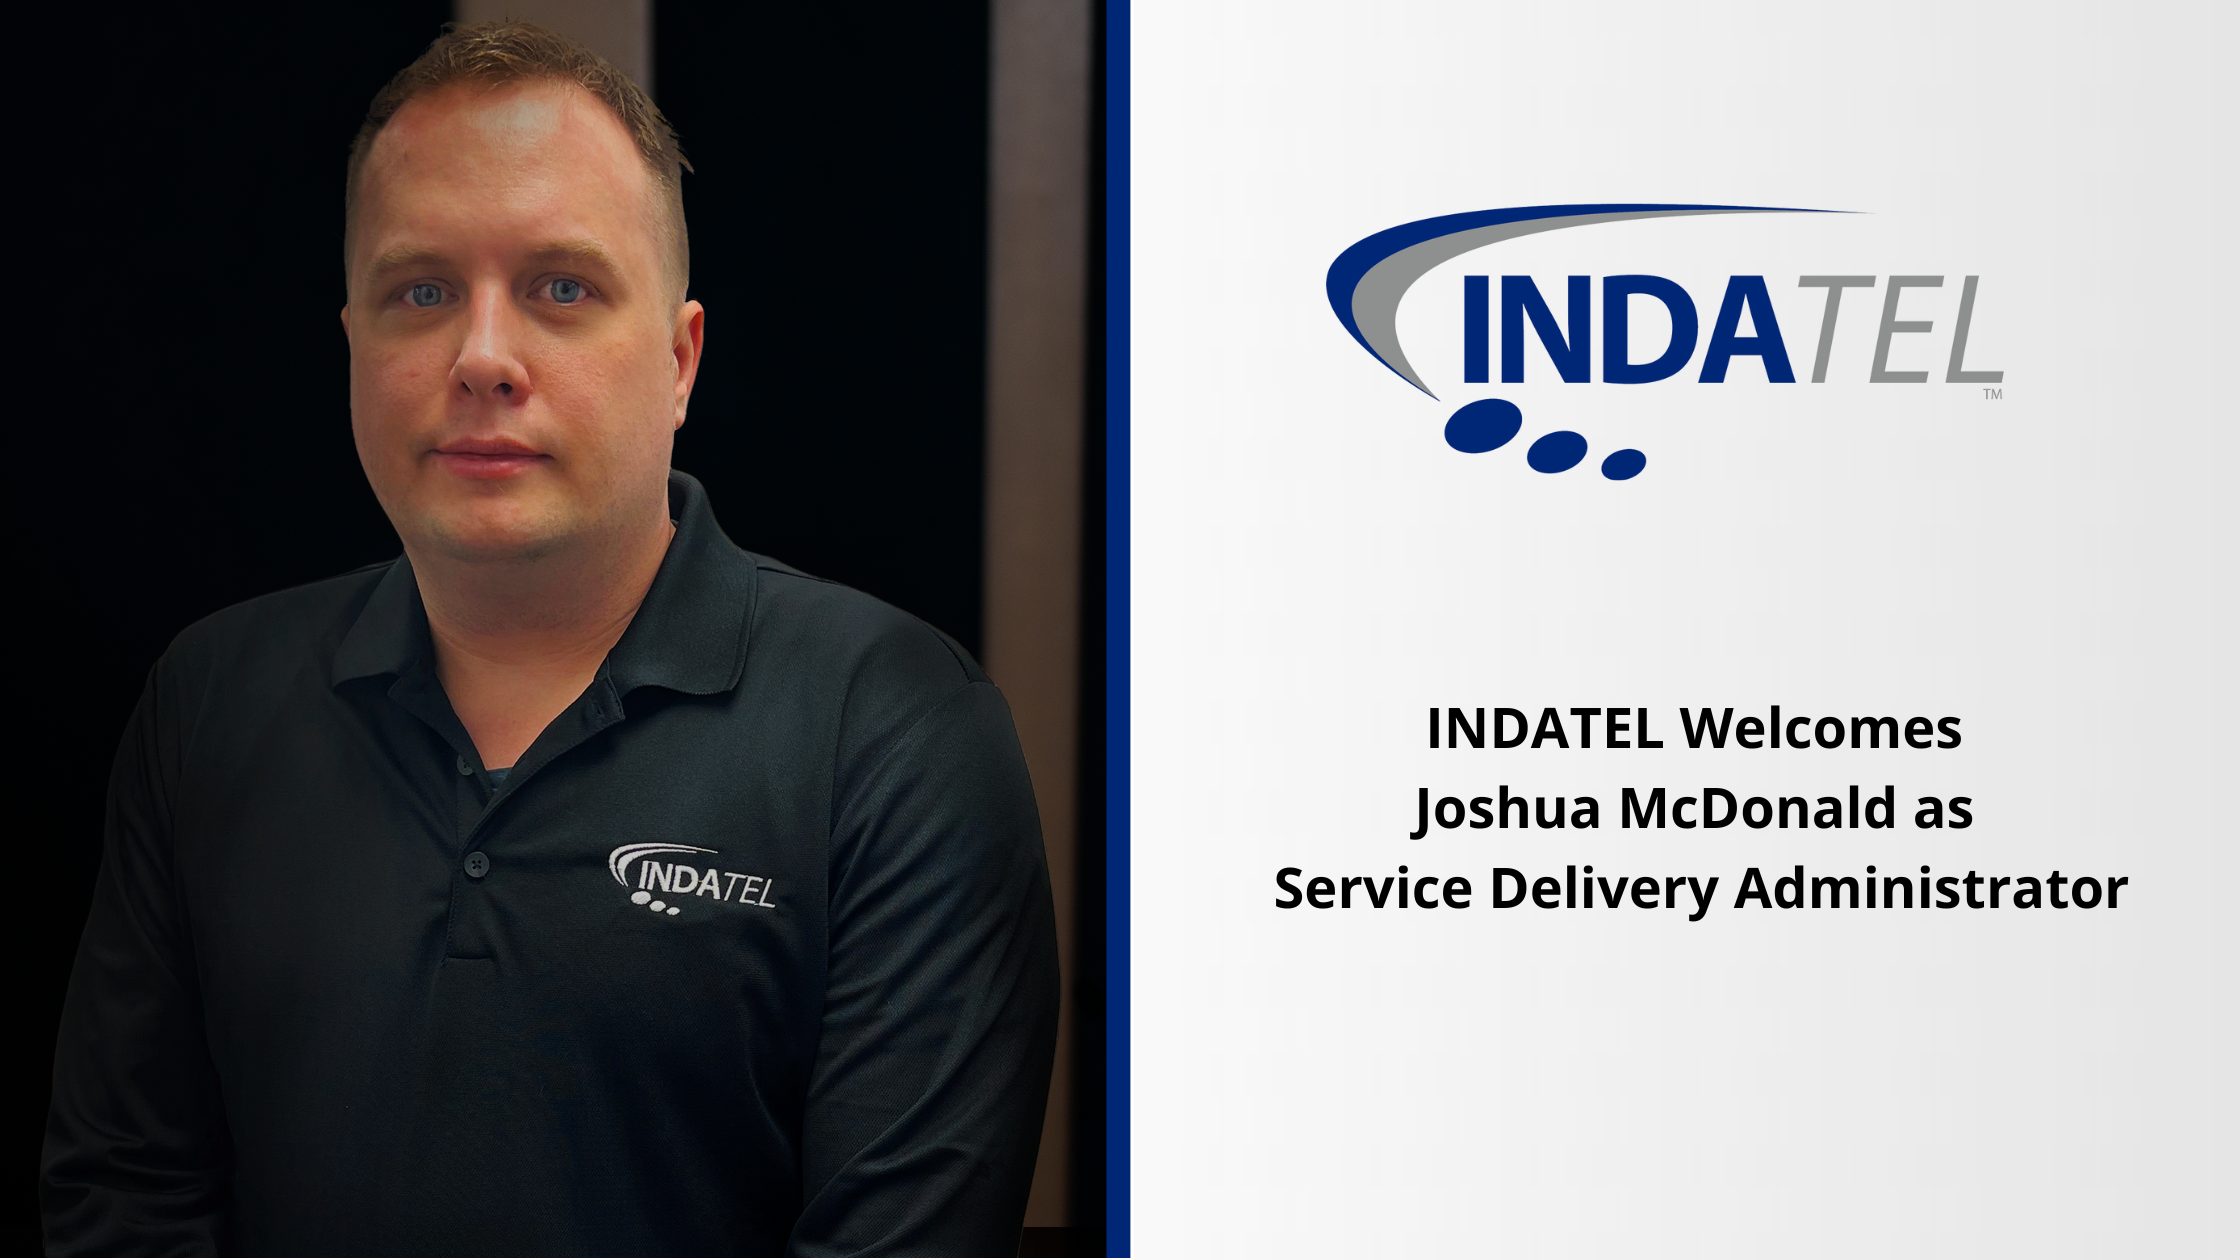 INDATEL Welcomes Joshua McDonald as Service Delivery Administrator image